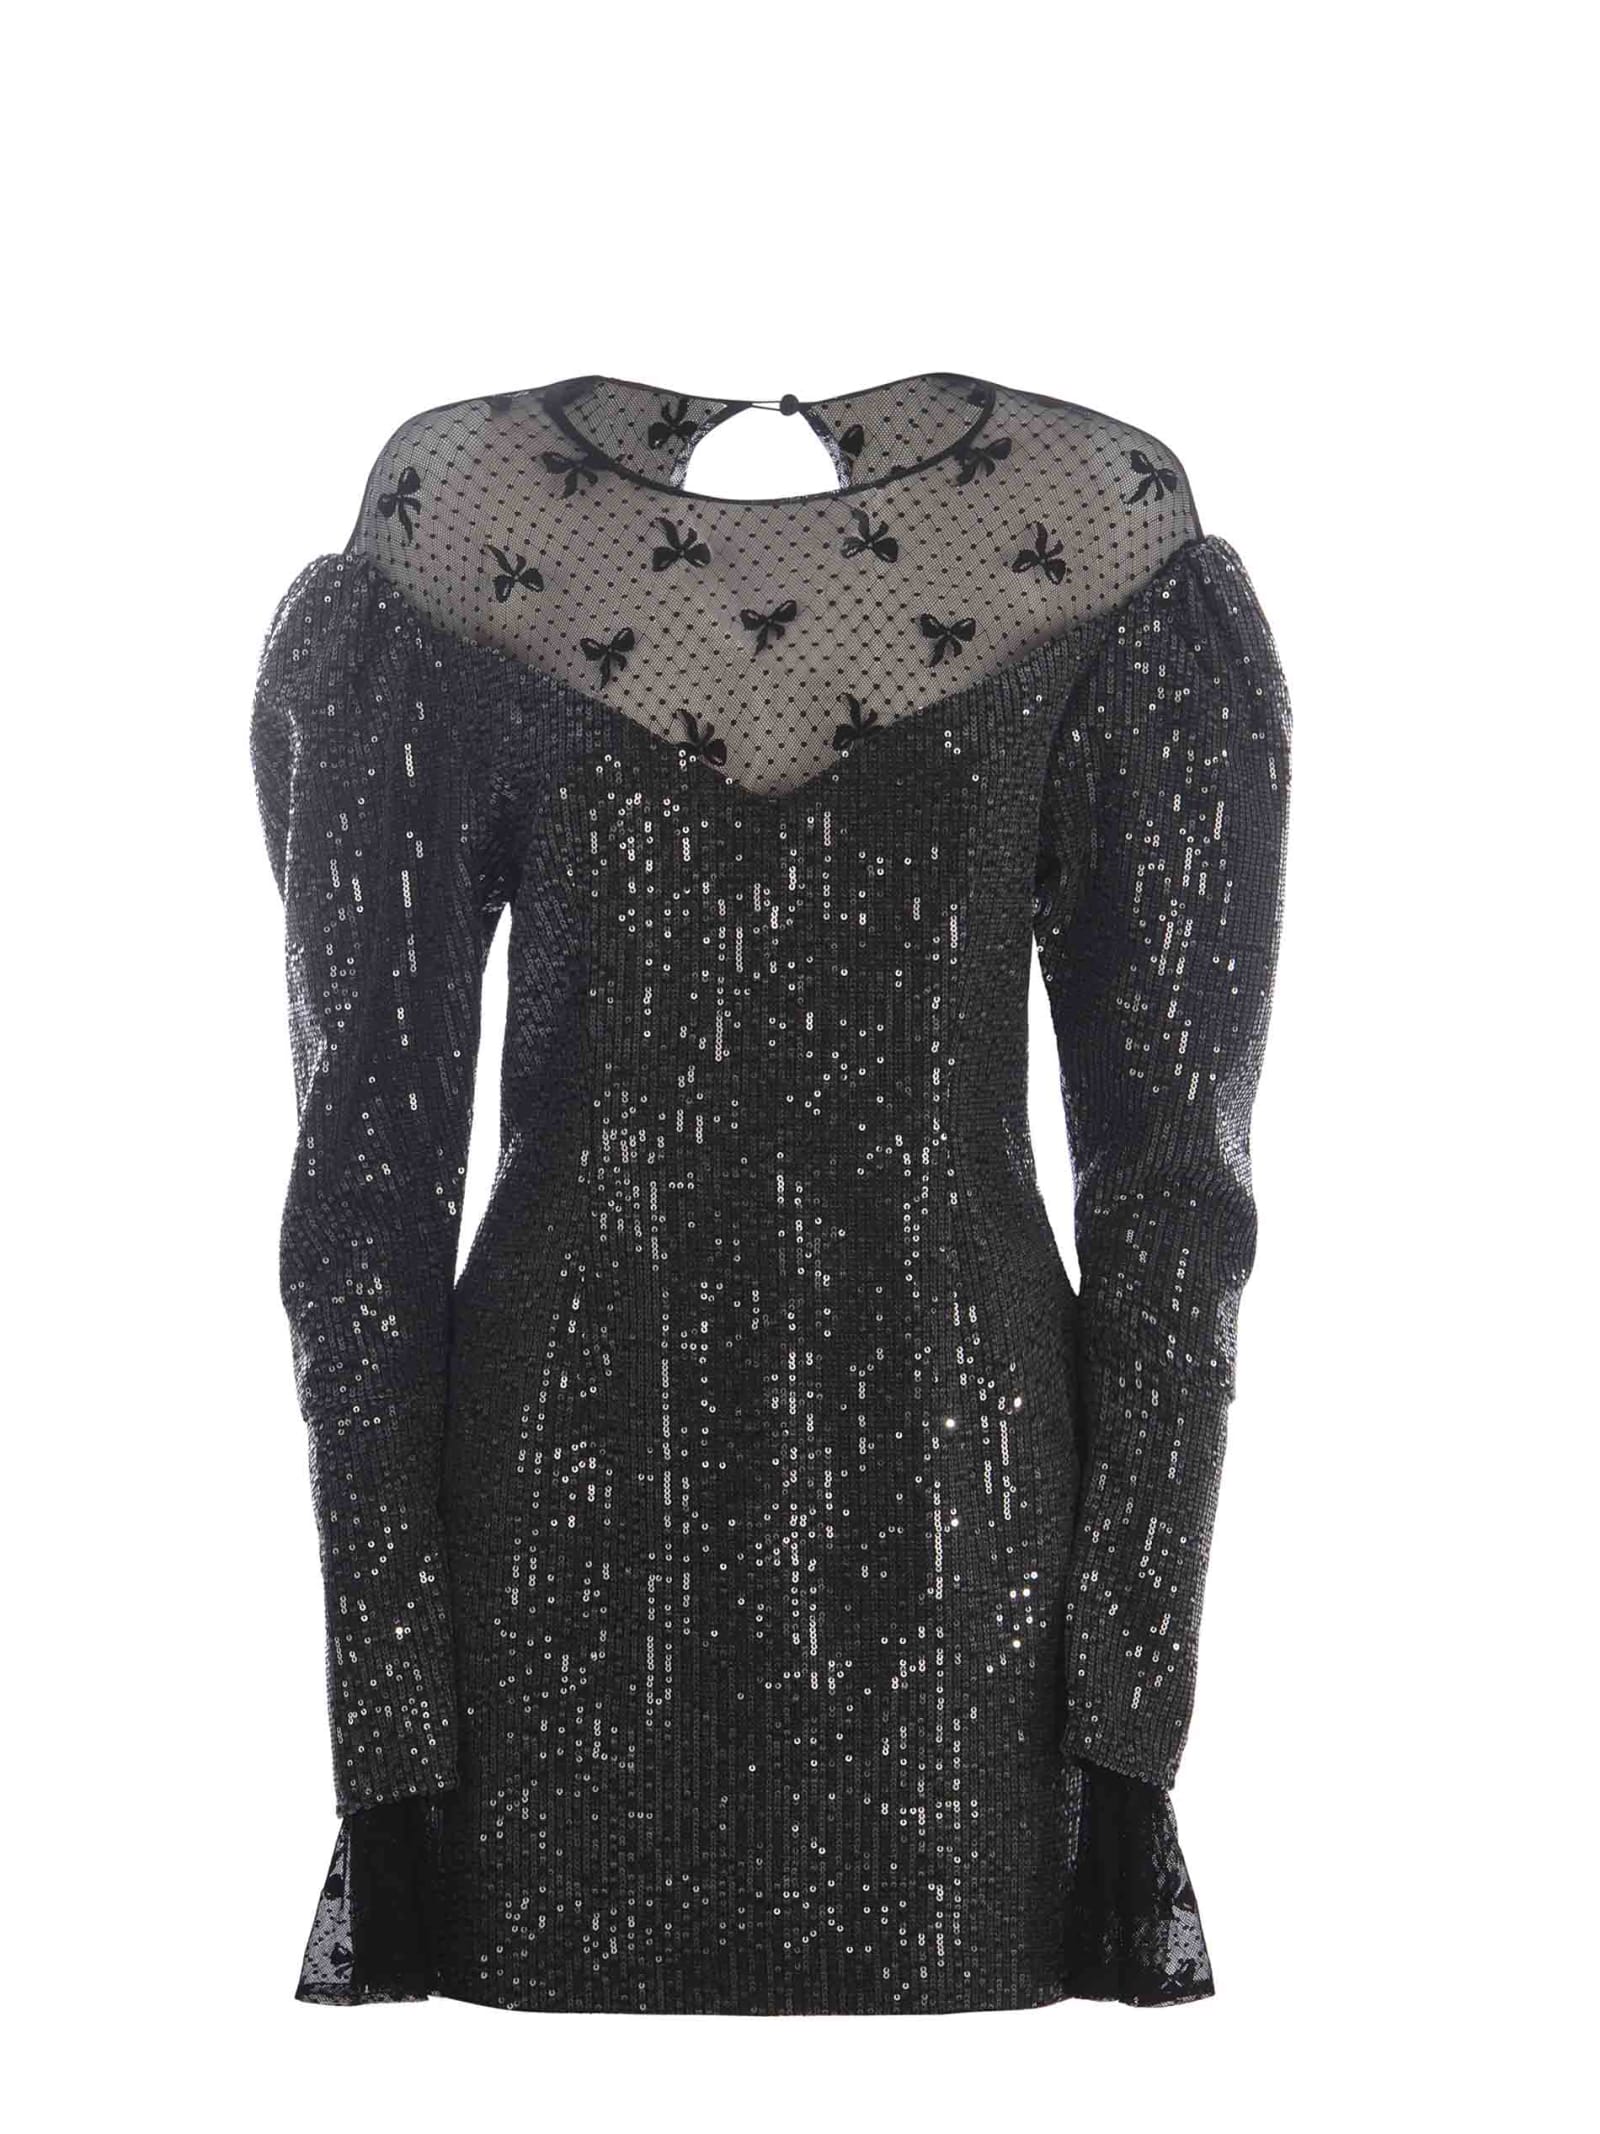 Shop Rotate Birger Christensen Dress Rotate Sequins Made Of Twill In Black